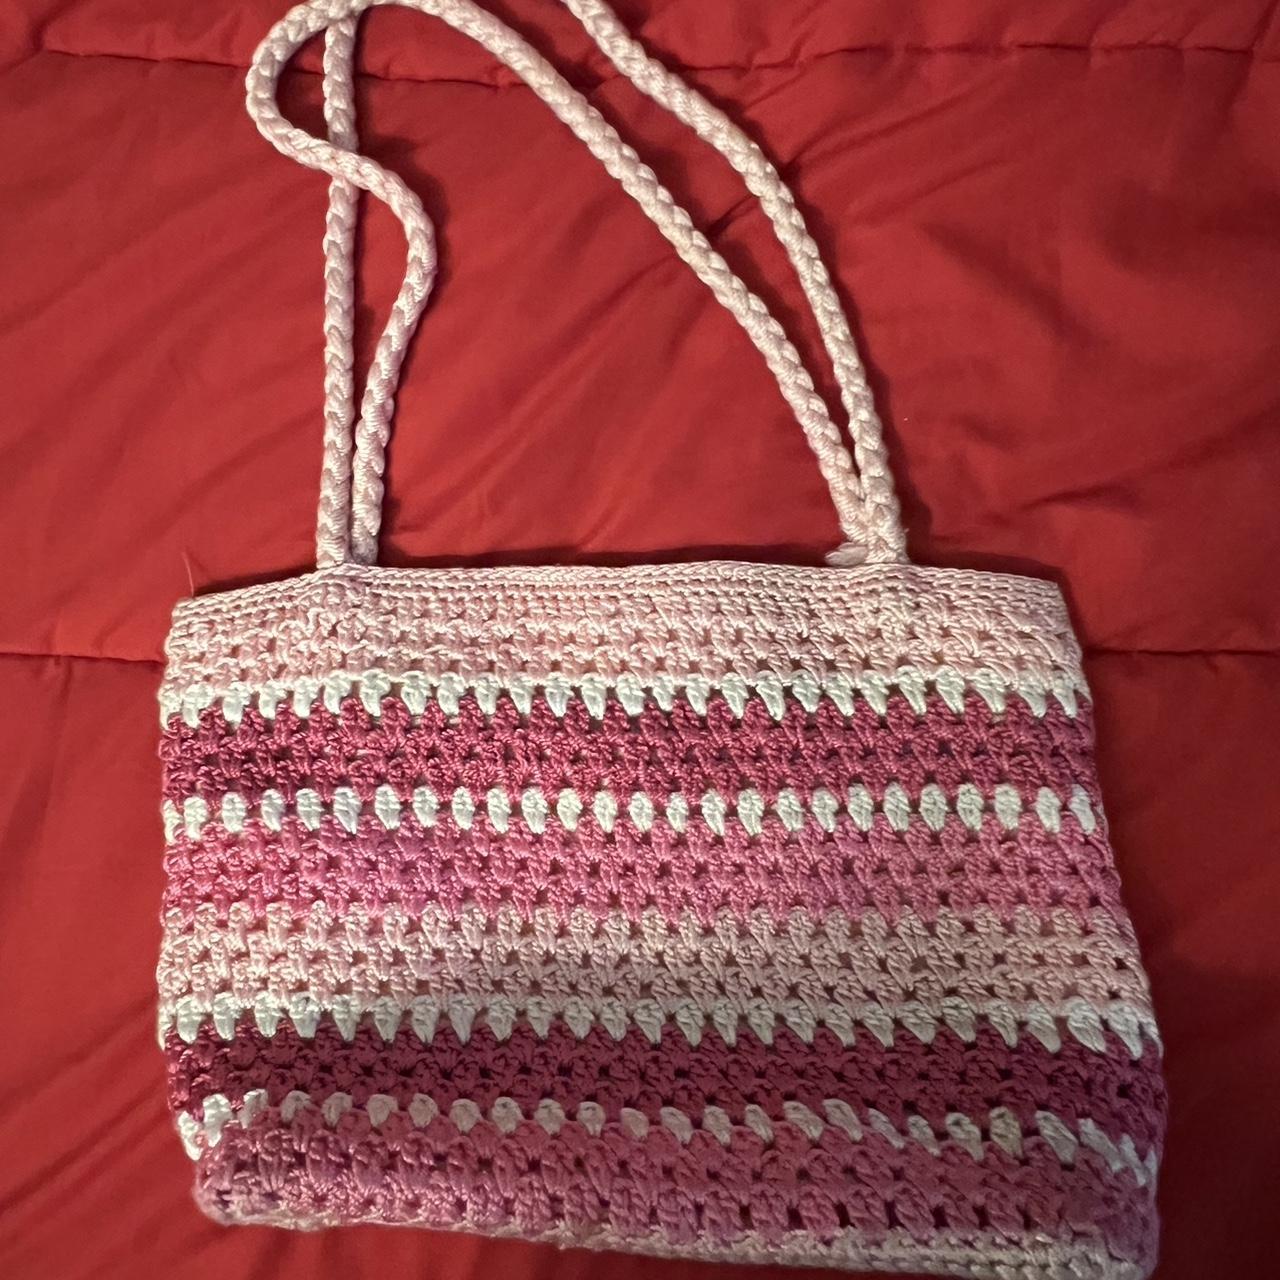 Crotchet/knit pink bag Beachy vibes. Could be used... - Depop